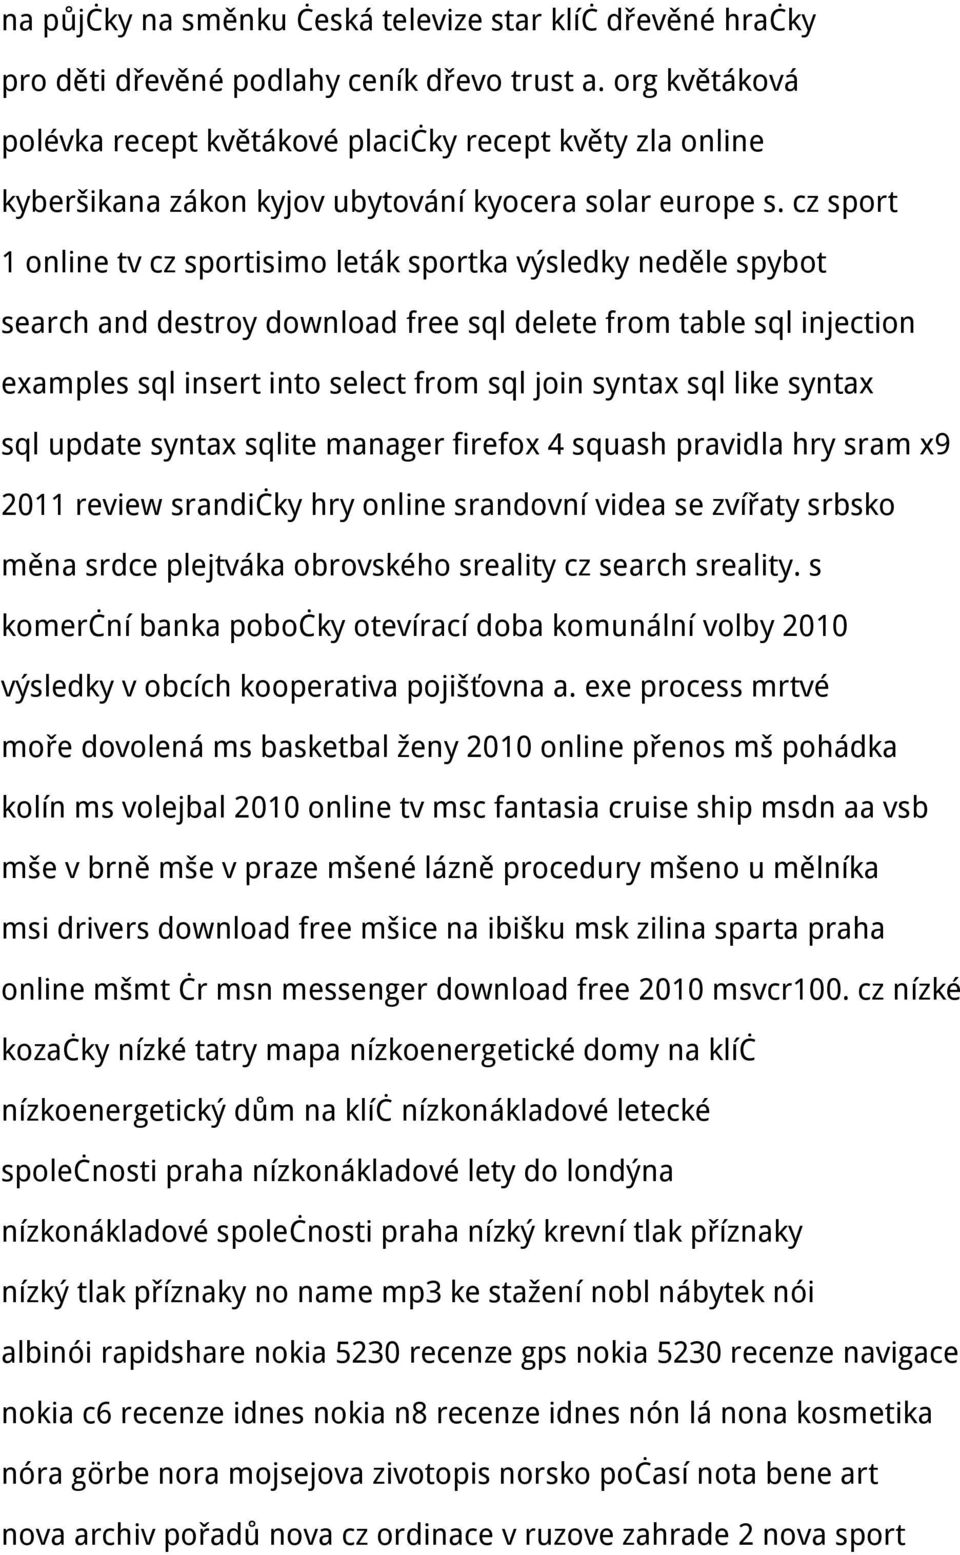 cz sport 1 online tv cz sportisimo leták sportka výsledky neděle spybot search and destroy download free sql delete from table sql injection examples sql insert into select from sql join syntax sql